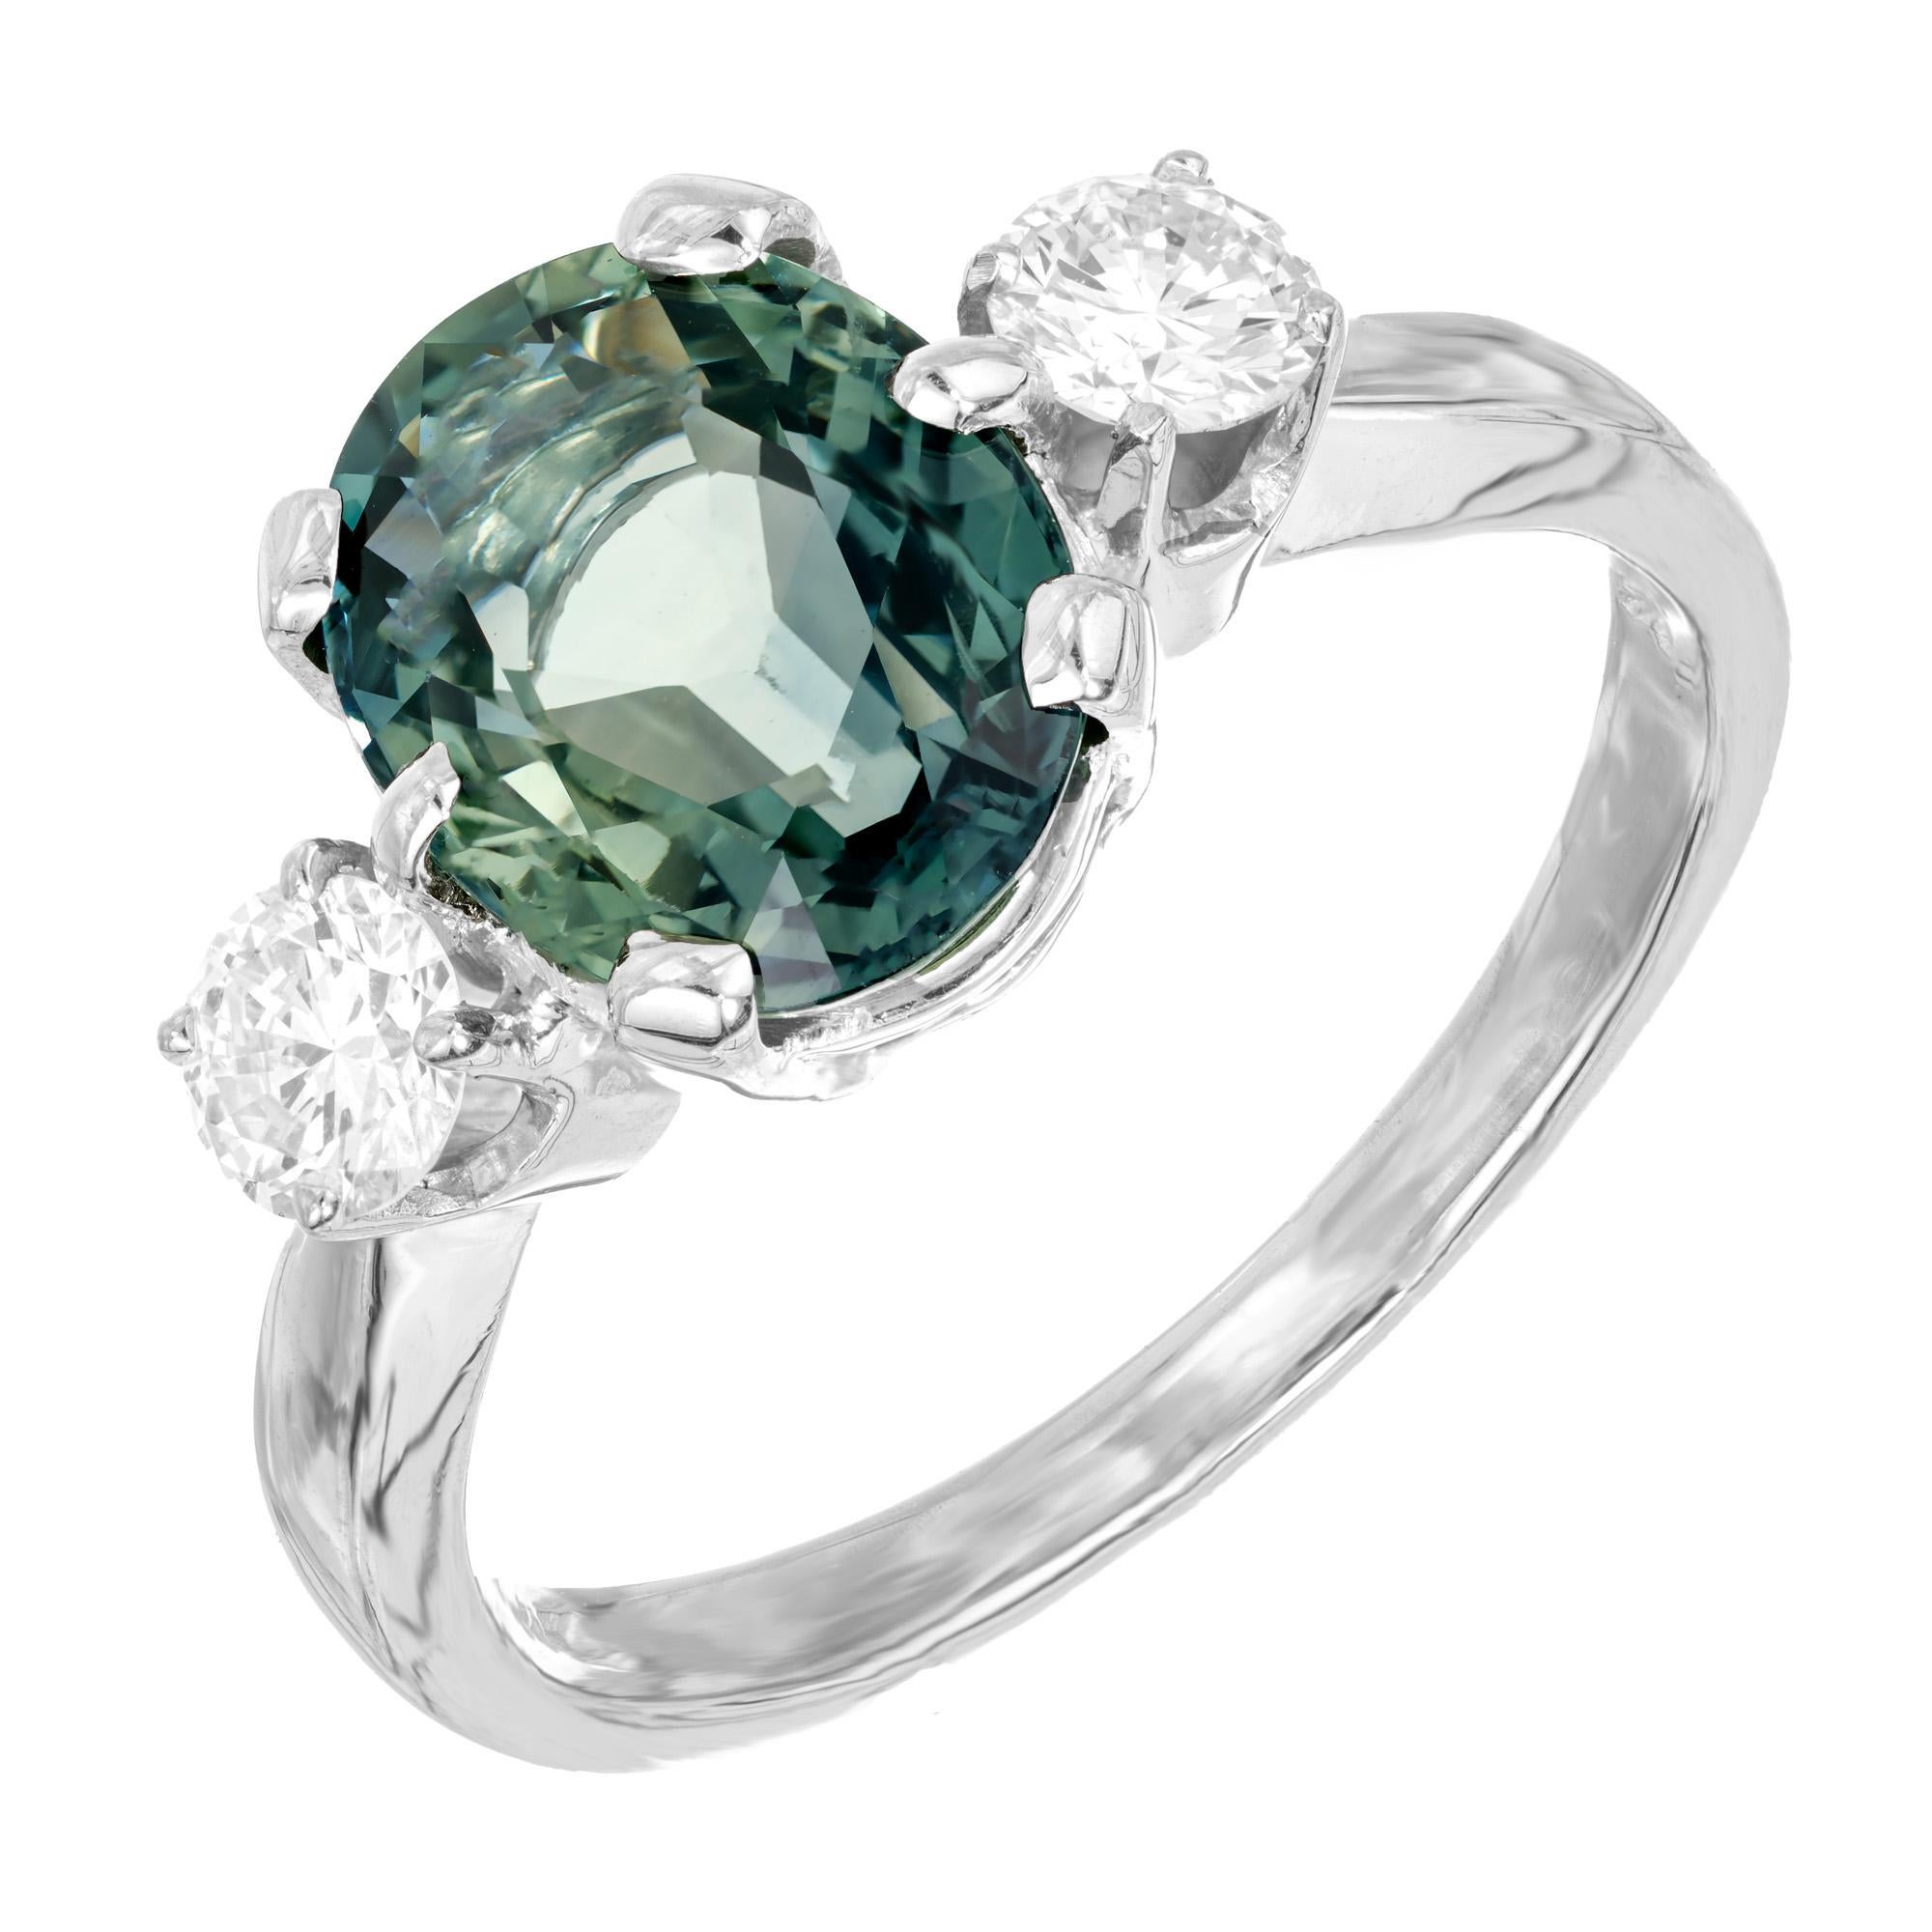 A minty blue green sapphire and diamond engagement ring. GIA certified oval 2.96ct blue green sapphire center stone. Set in a three-stone 14k white gold setting with two round brilliant cut side diamonds. This sapphire has been certified by the GIA